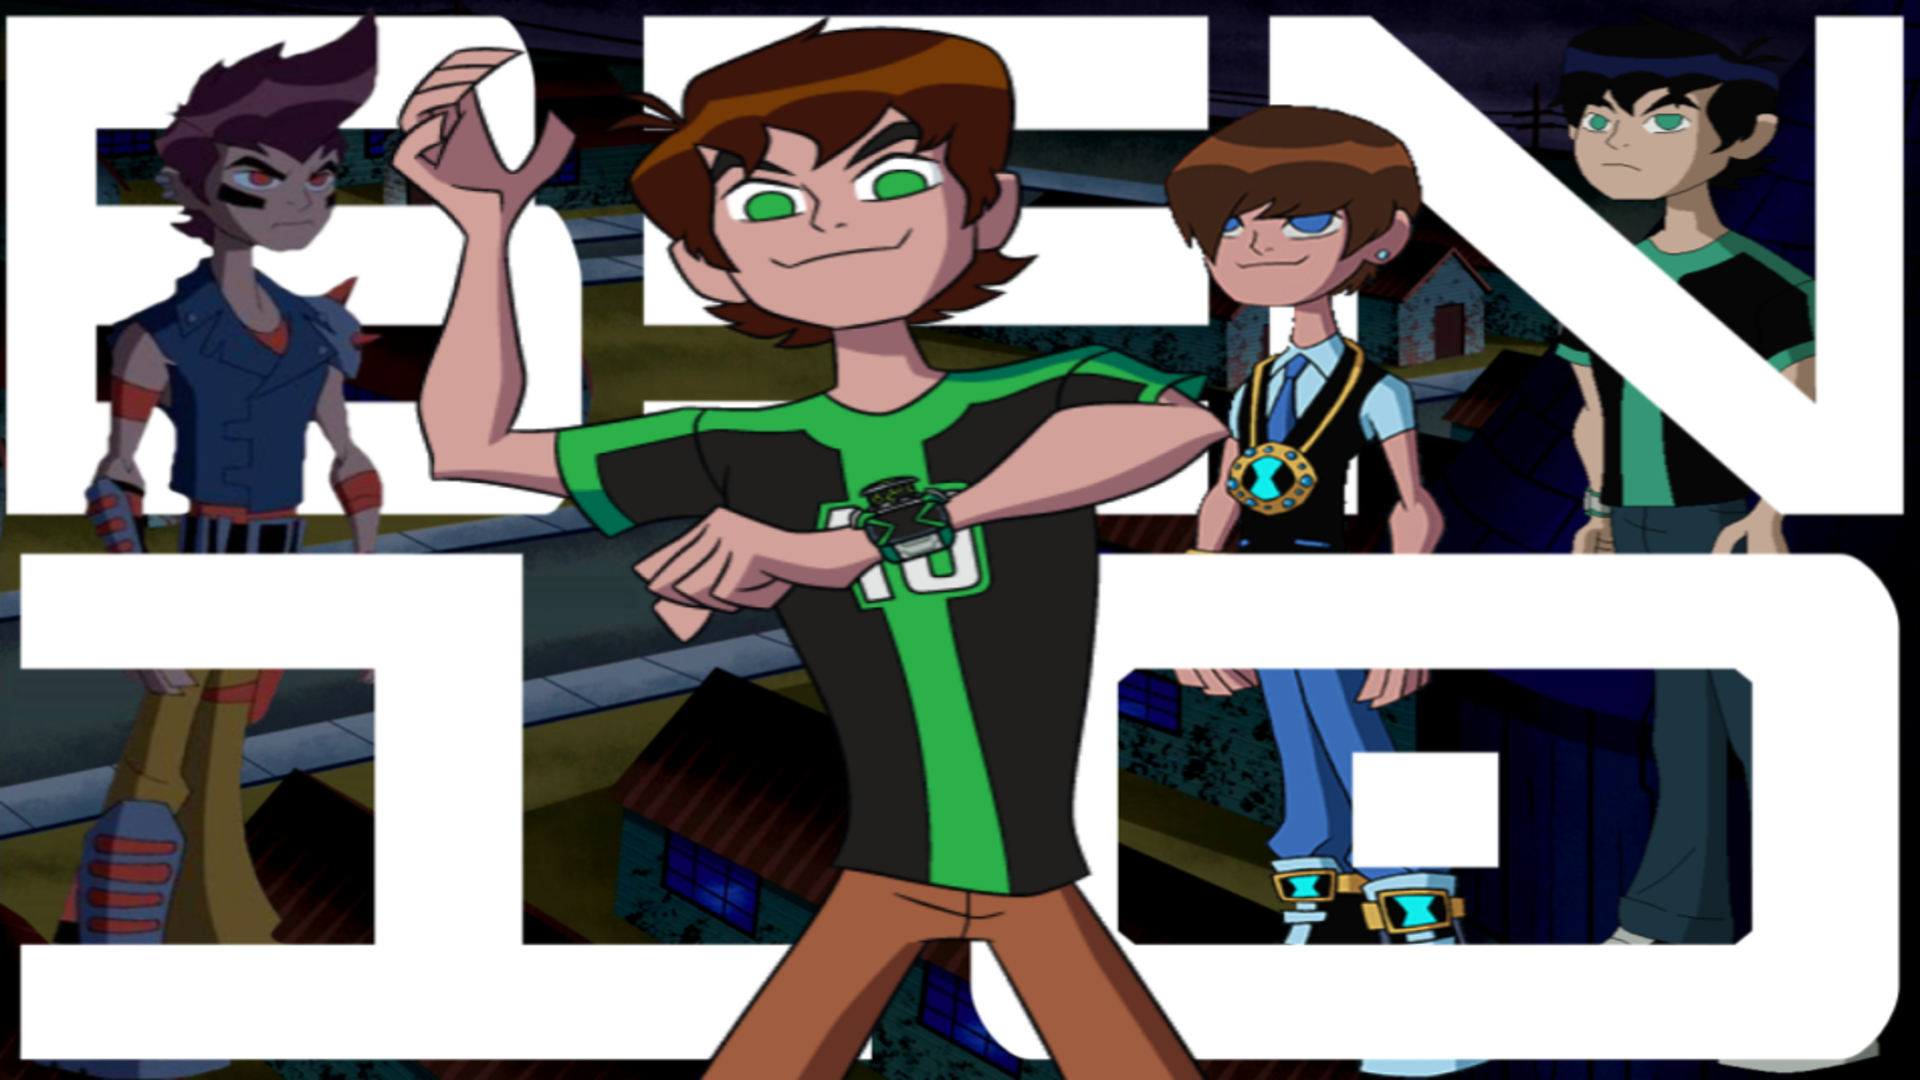 Ben 10 Rap - Iron Master - New Rap to be Released Today : r/Ben10